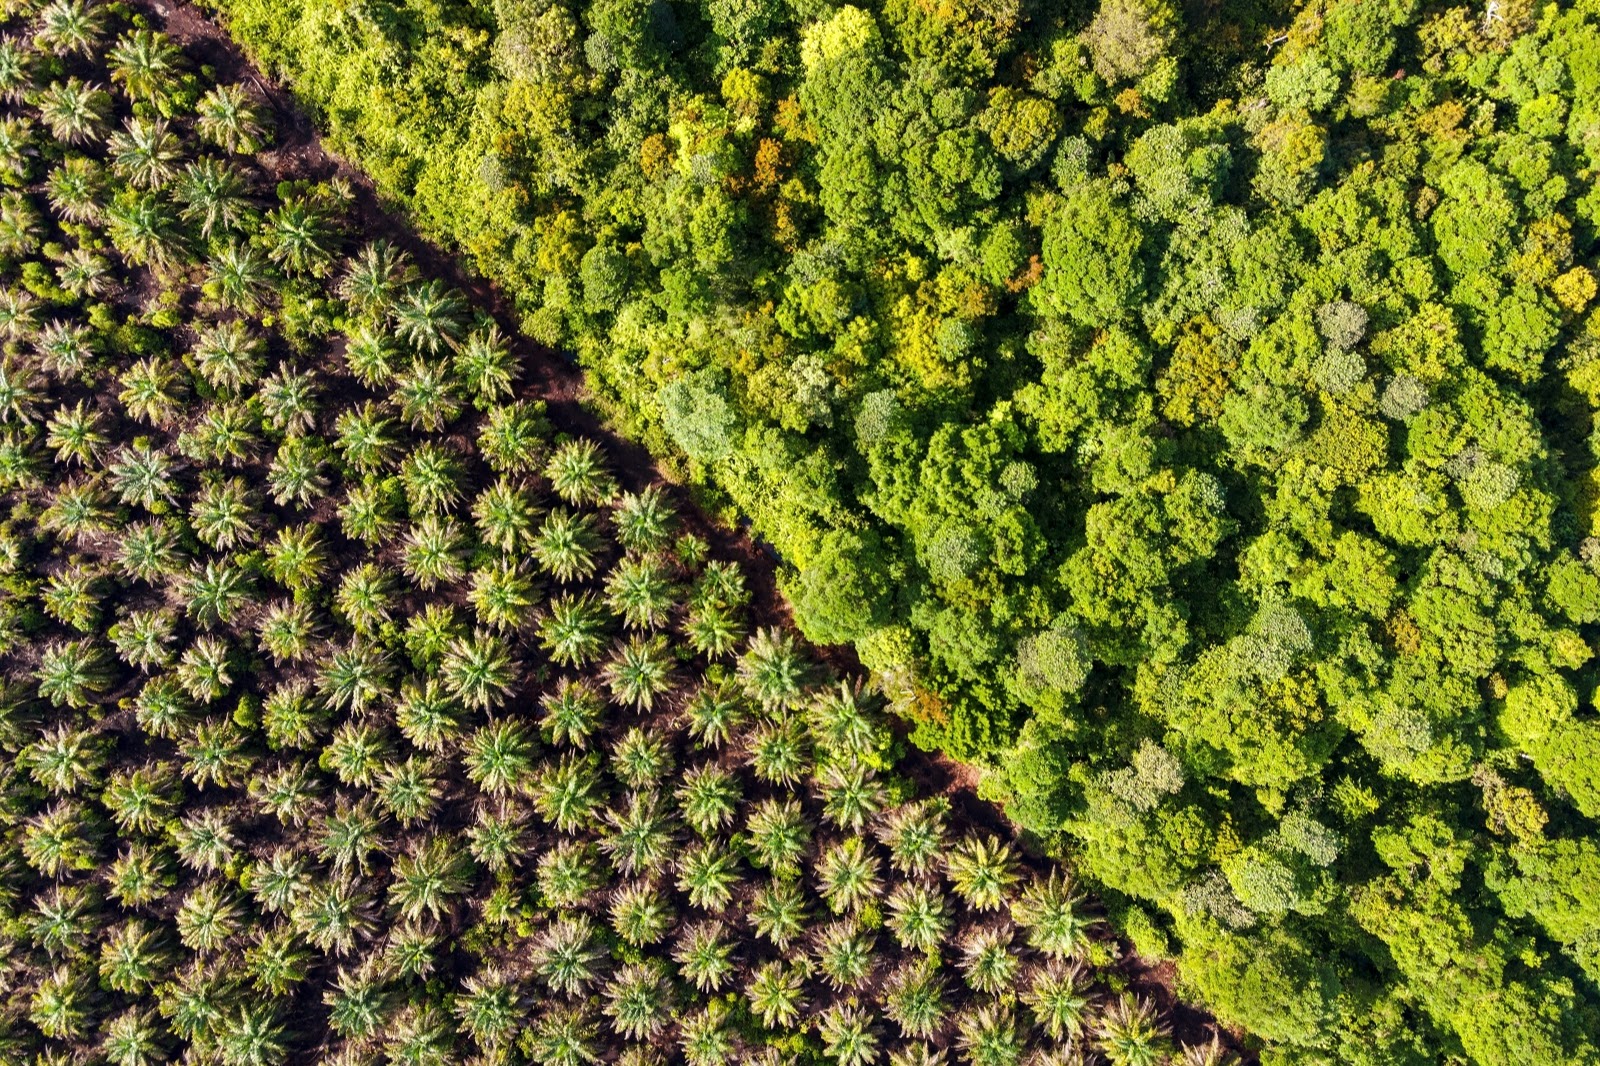 Palm Oil Plantation at the edge of Peat Land Swamp Rainforest. Photo: Nora Carol Photography / Moment